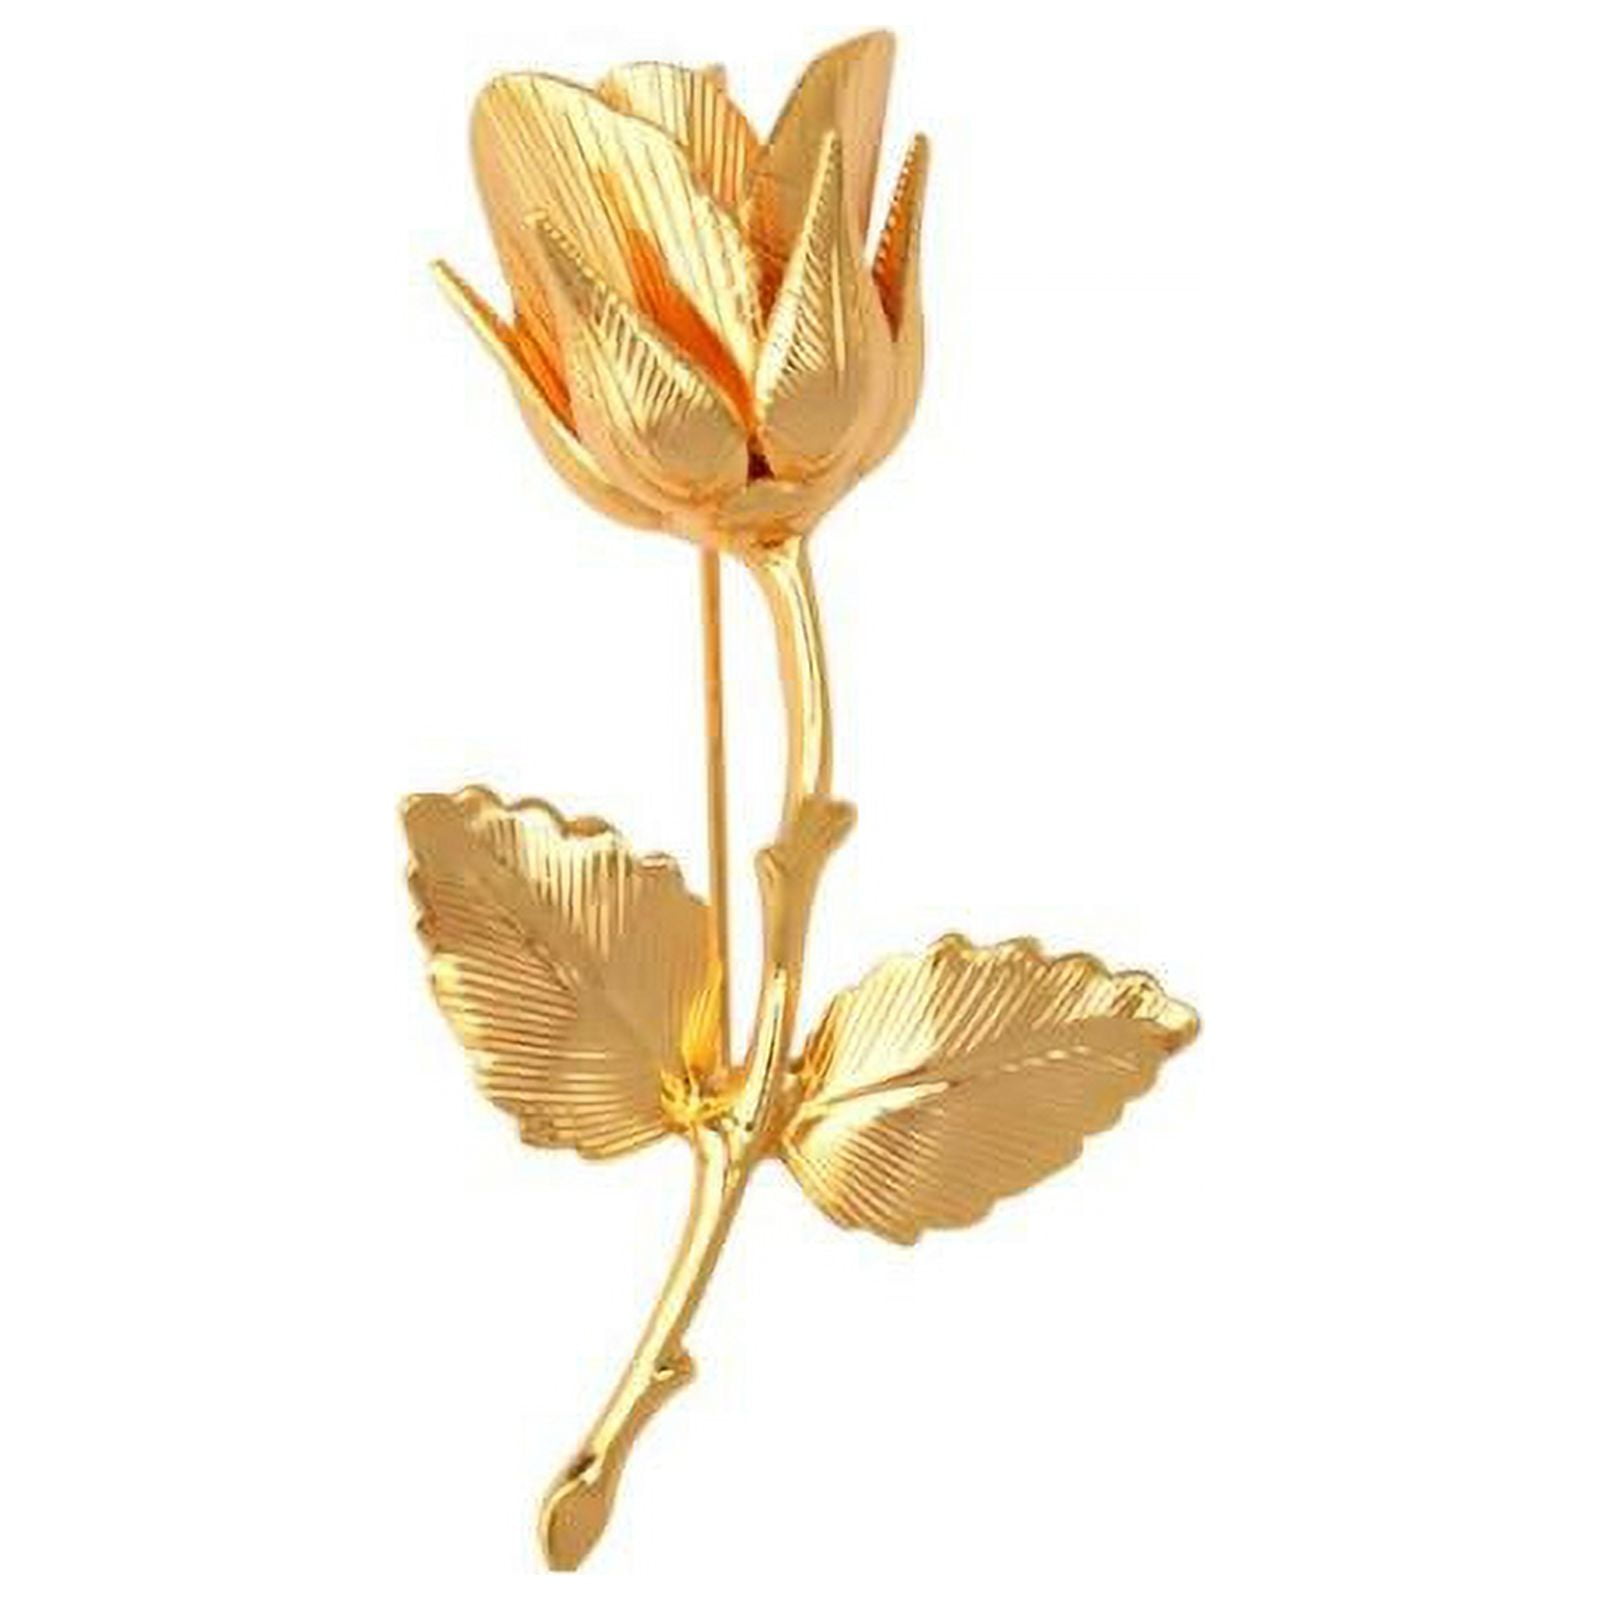 Vittorio Vico Men's Formal Striped Flower Lapel Pin: Flower Pin Suit  Accessories Pins for Suit or Tuxedo by Classy Cufflinks